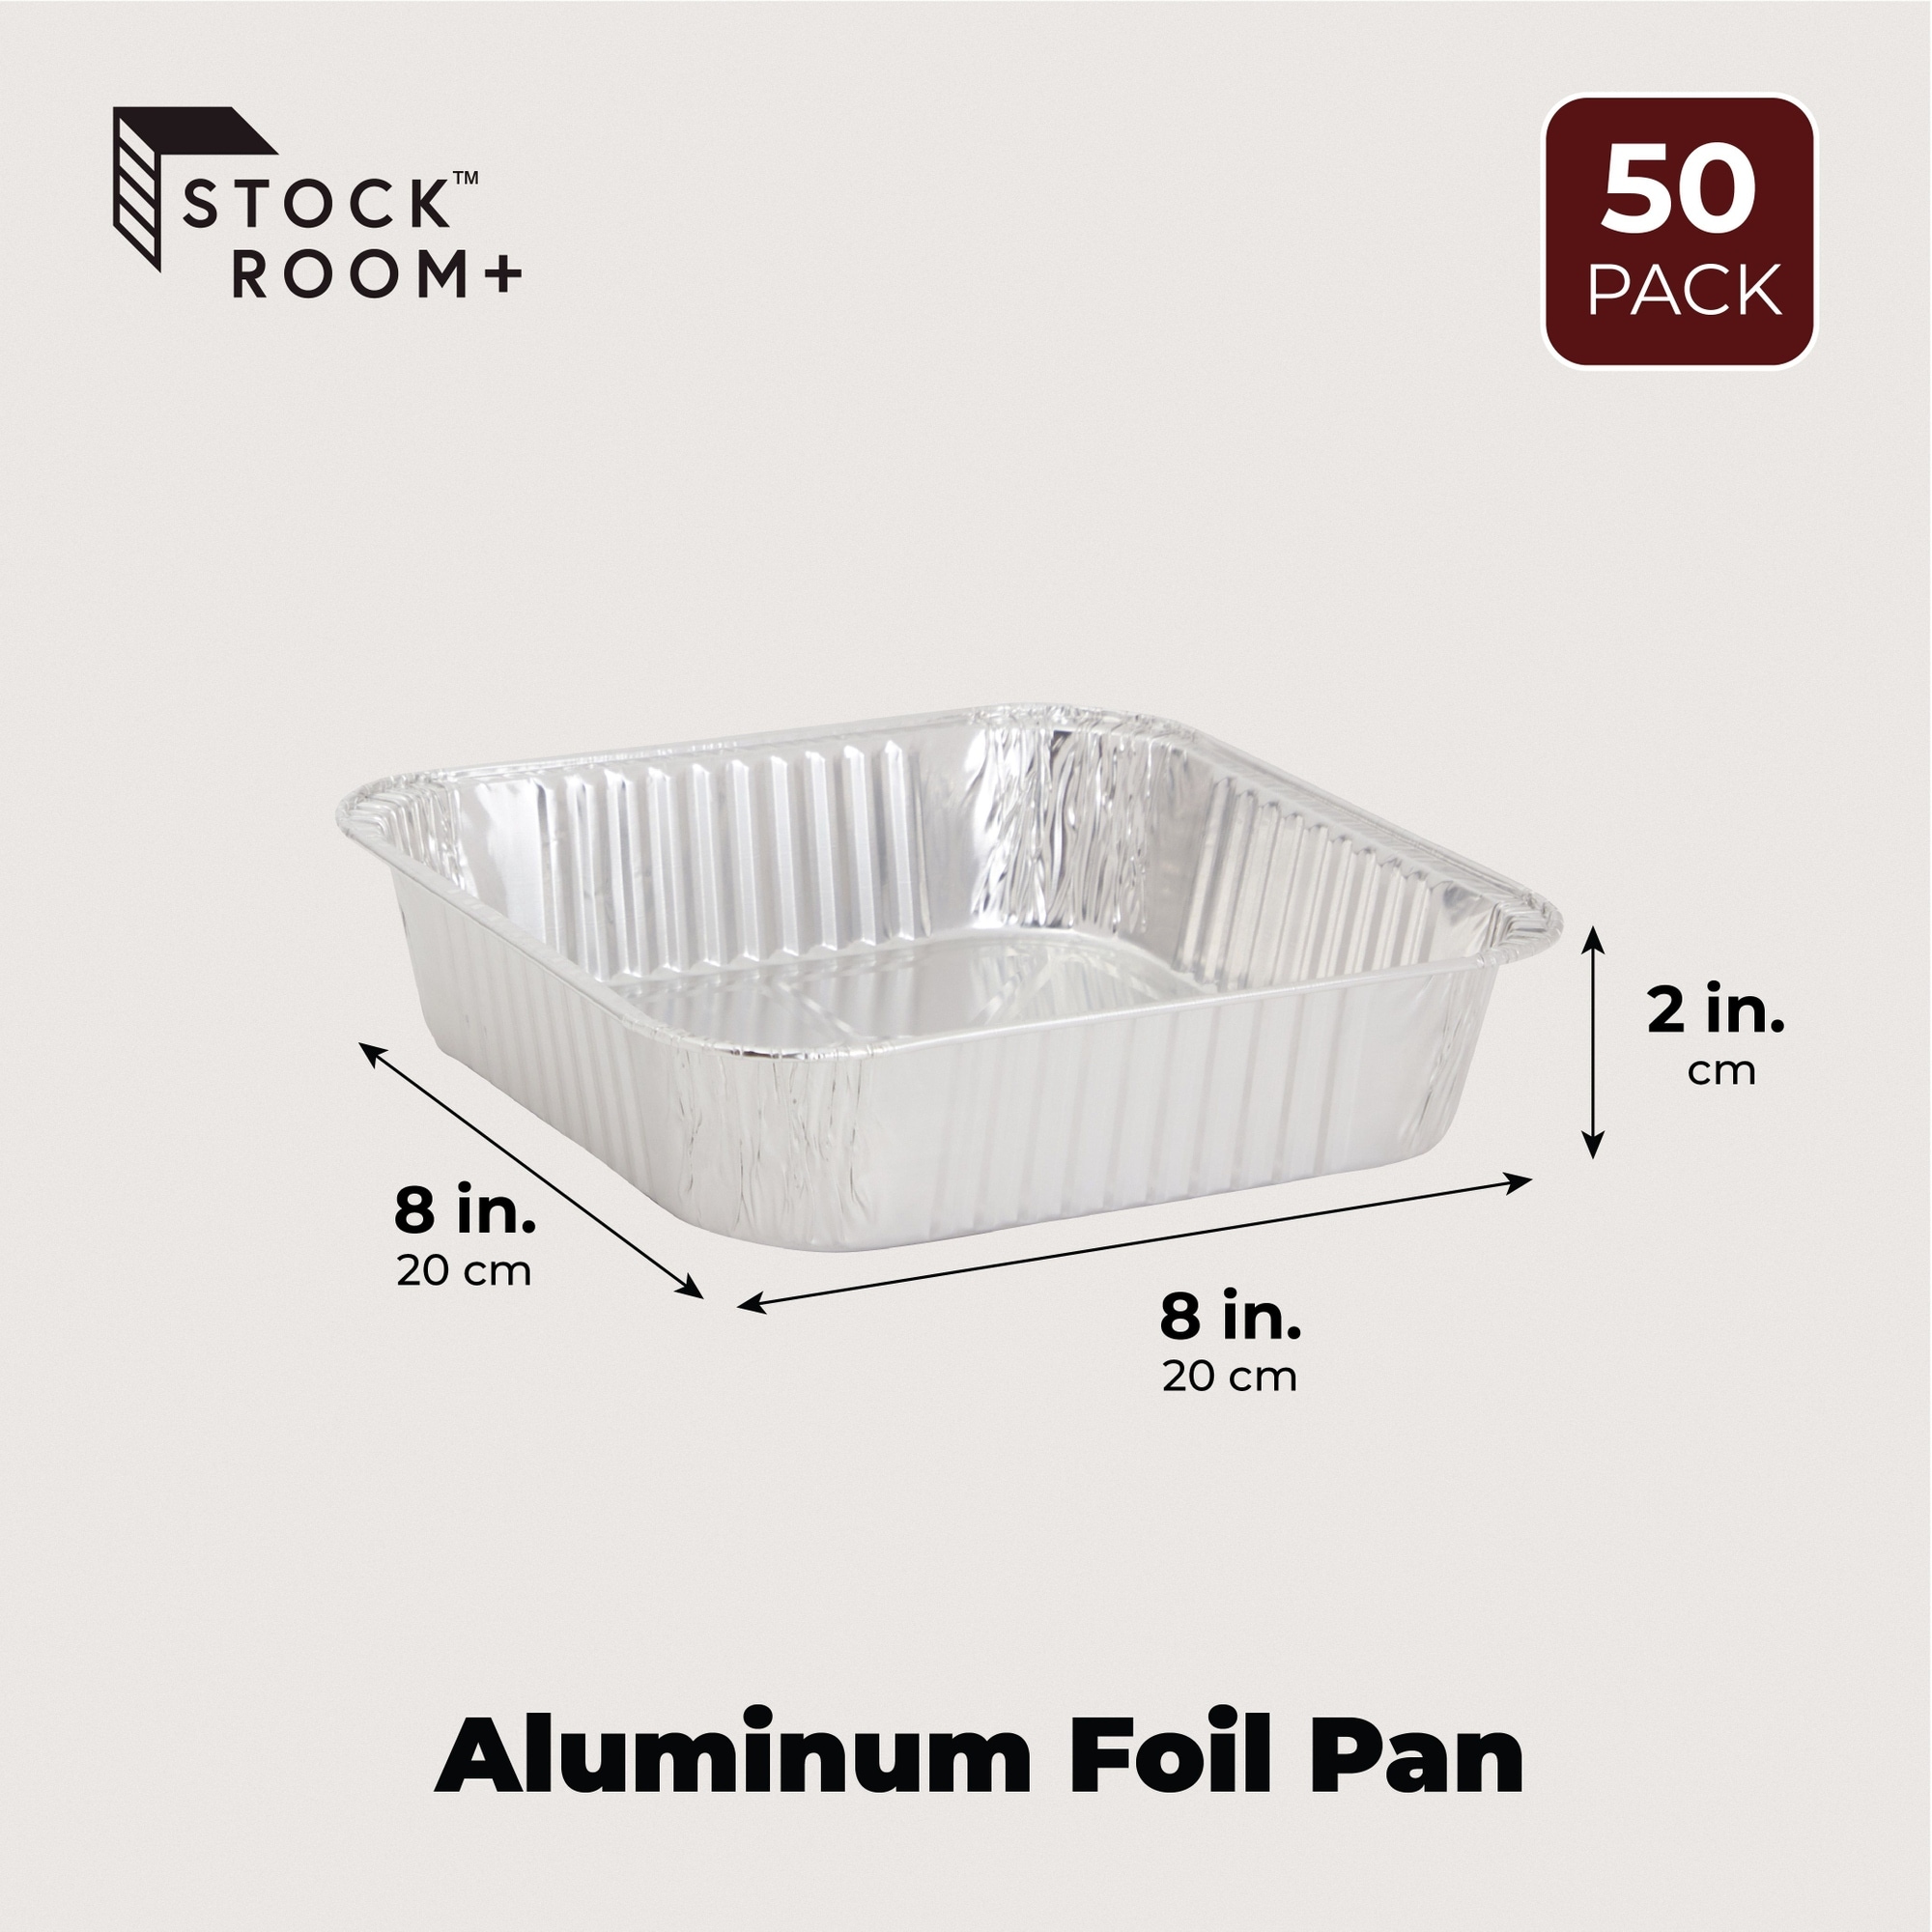 https://ak1.ostkcdn.com/images/products/is/images/direct/f8879d6a02a6777c0b5eb9b18e6eab87dddbd576/8x8-Foil-Pans%C2%A0for-Meal-Prep-and-Cooking%2C-Disposable%C2%A0Aluminum%C2%A0Trays%C2%A0%2850-Pack%29.jpg